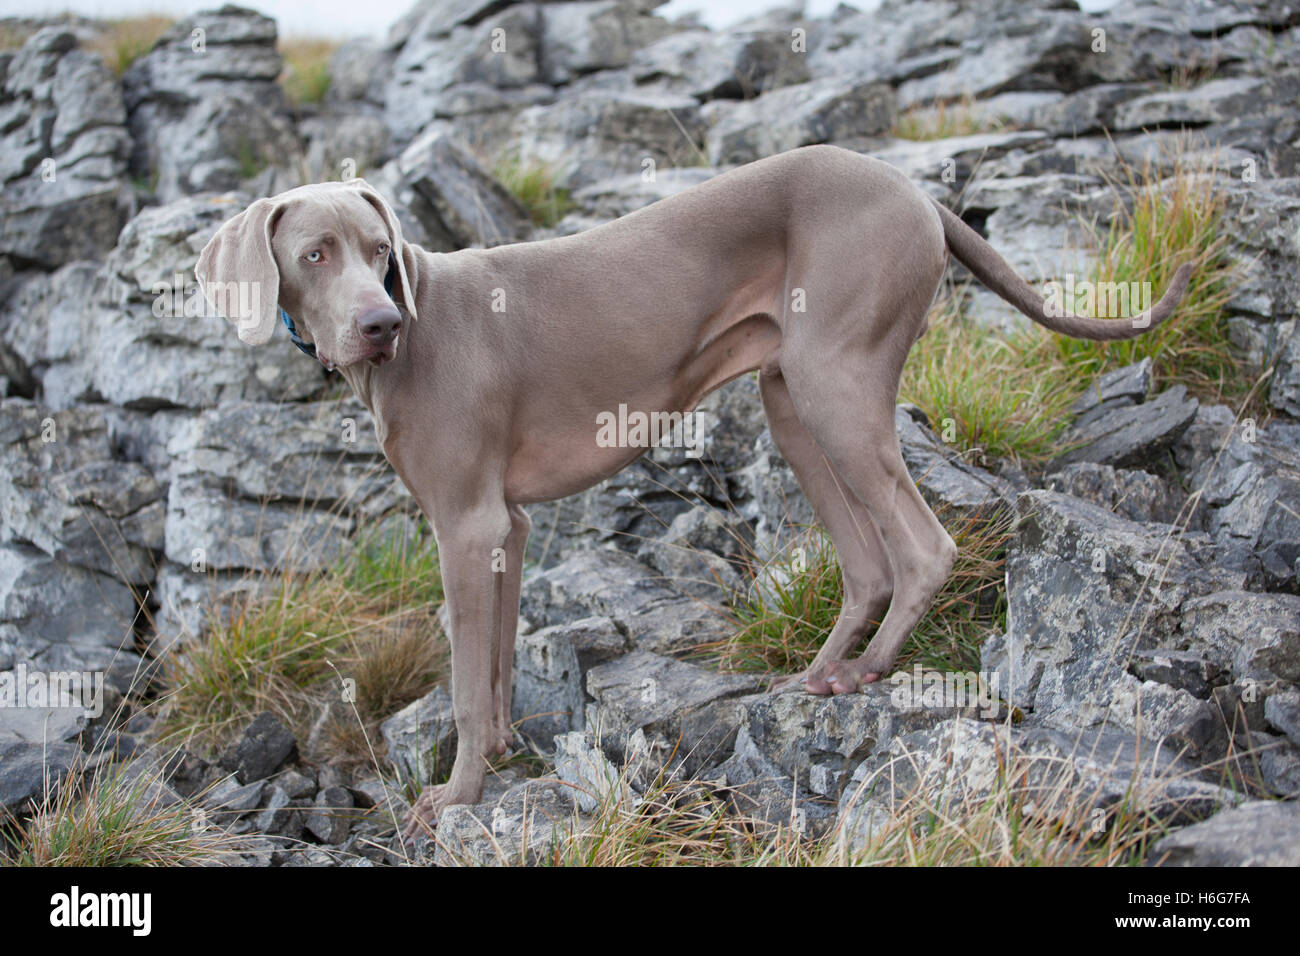 Ten month old Weimaraner puppy dog in countryside setting, Yorkshire Dales, UK Stock Photo